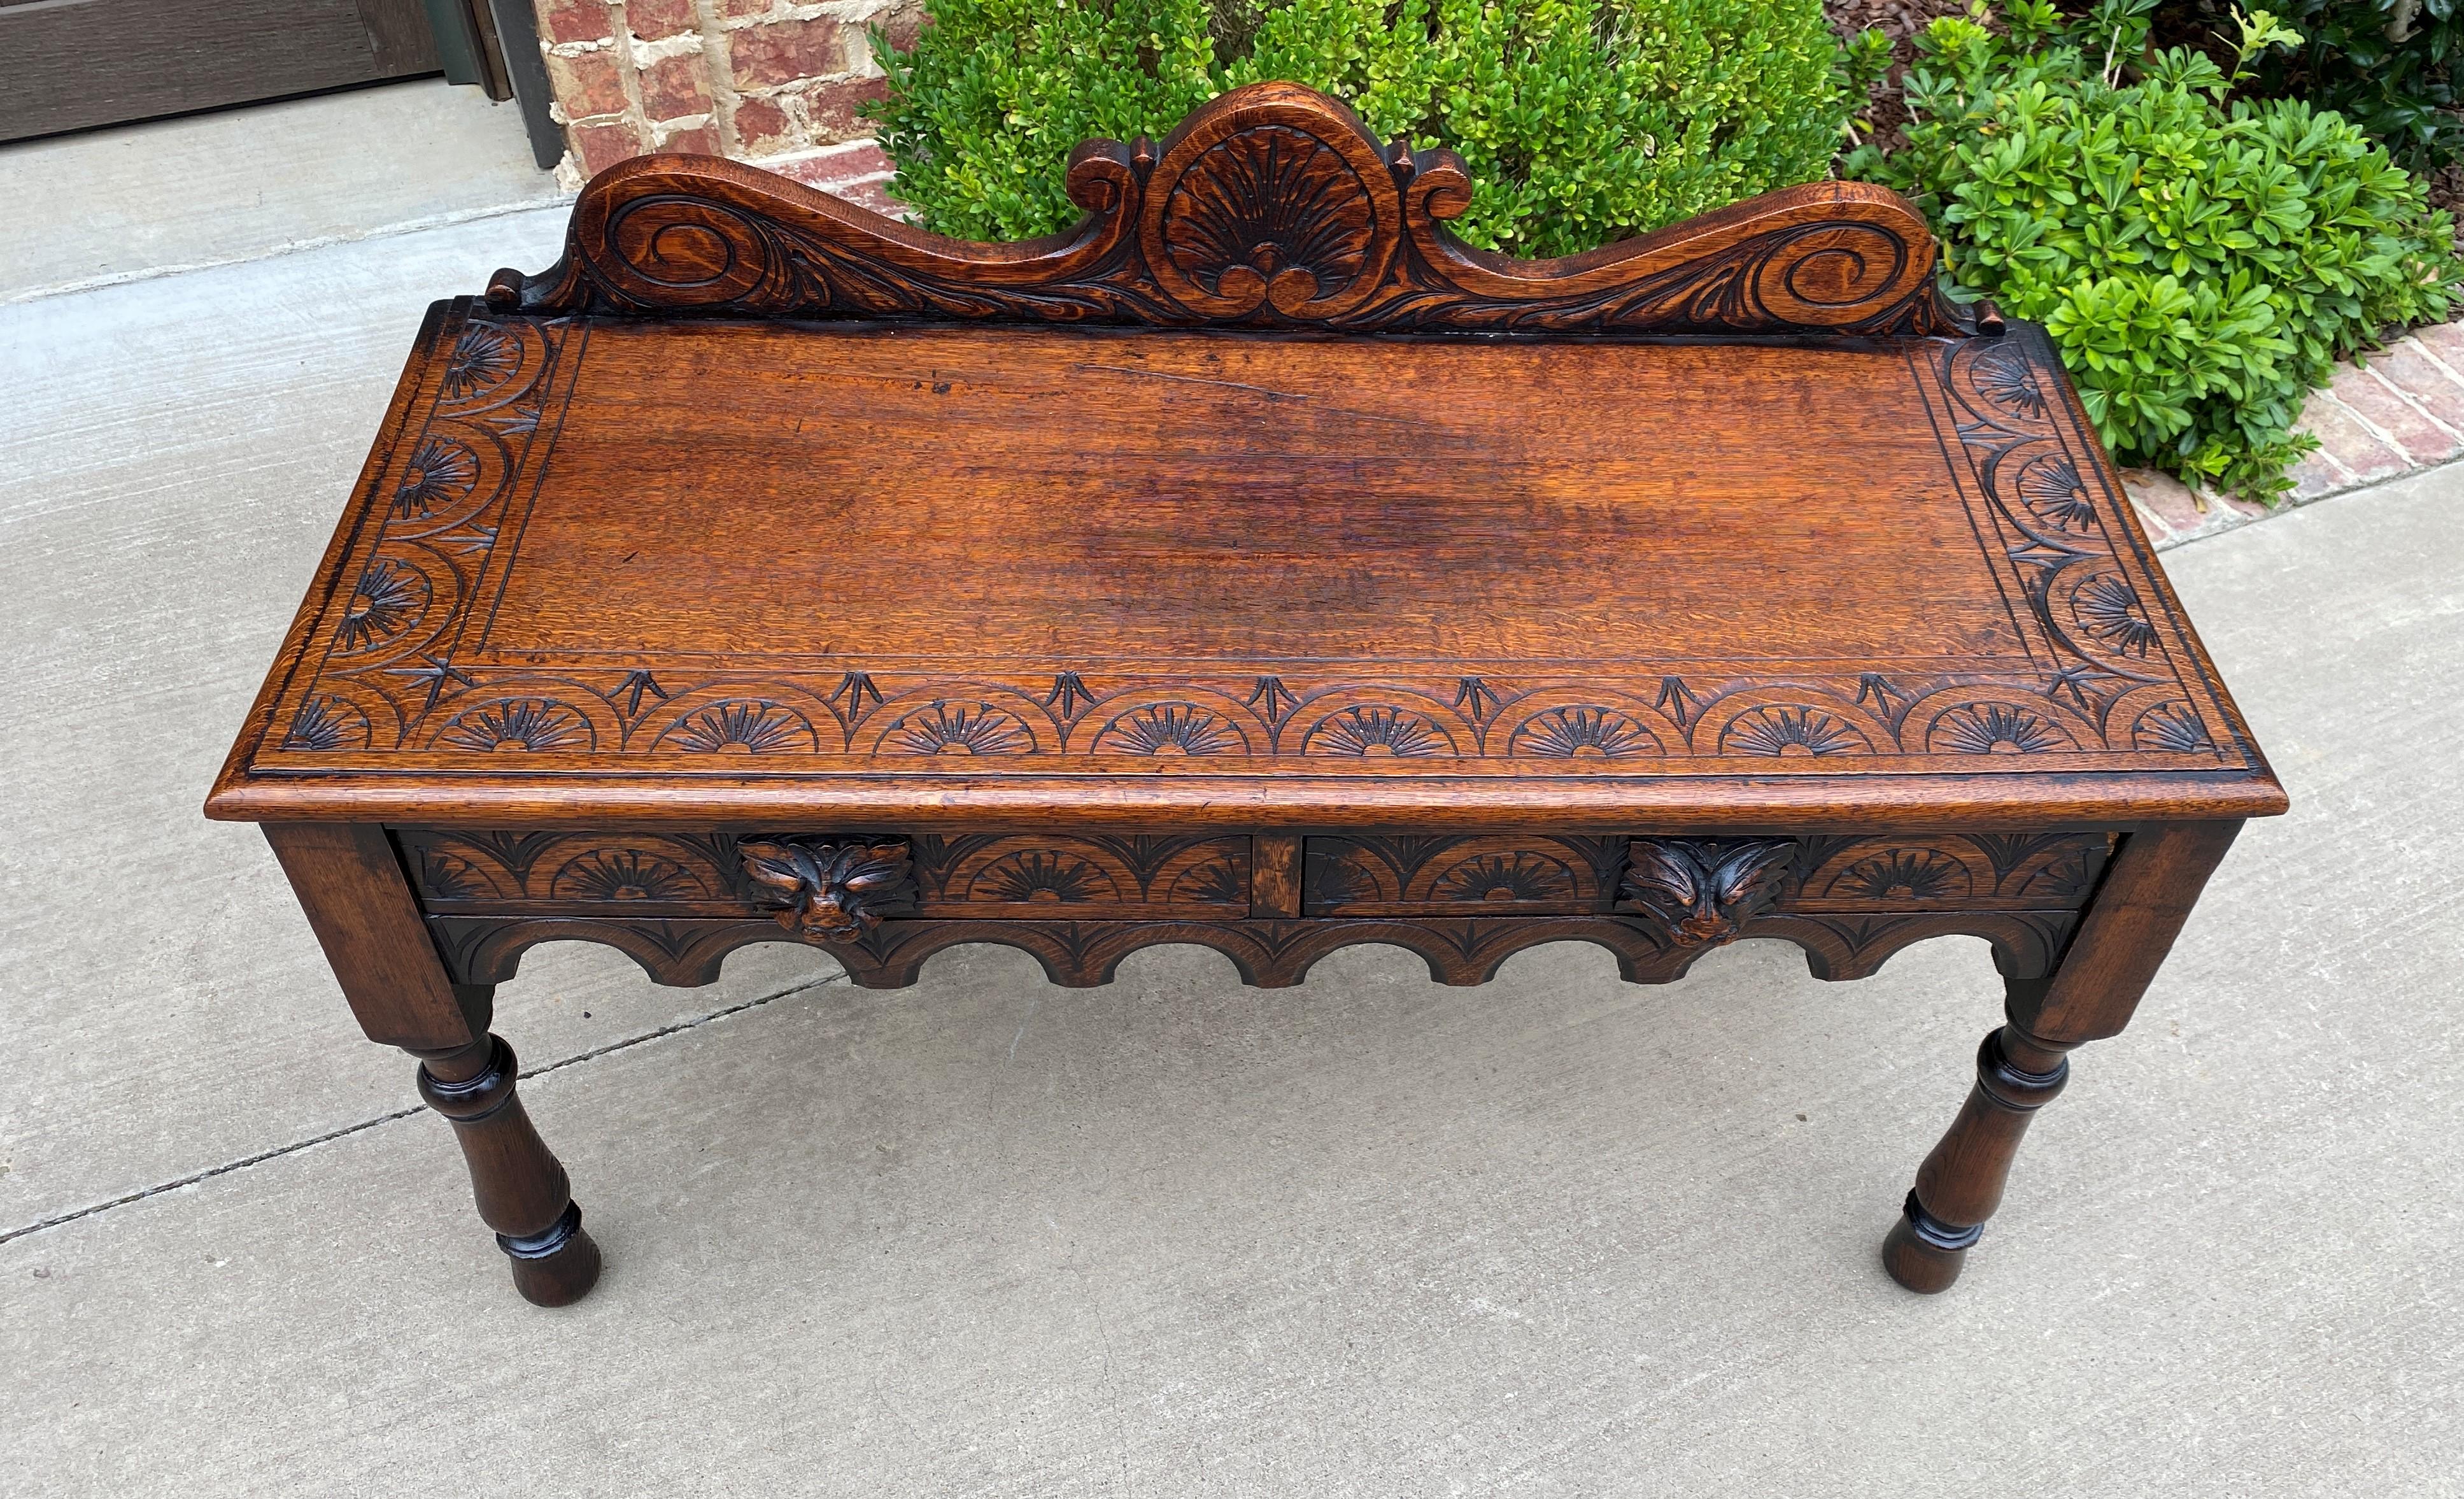 Early 20th Century Antique English Window Seat Bed Bench Gothic Revival Carved Oak 2 Drawers c.1900 For Sale